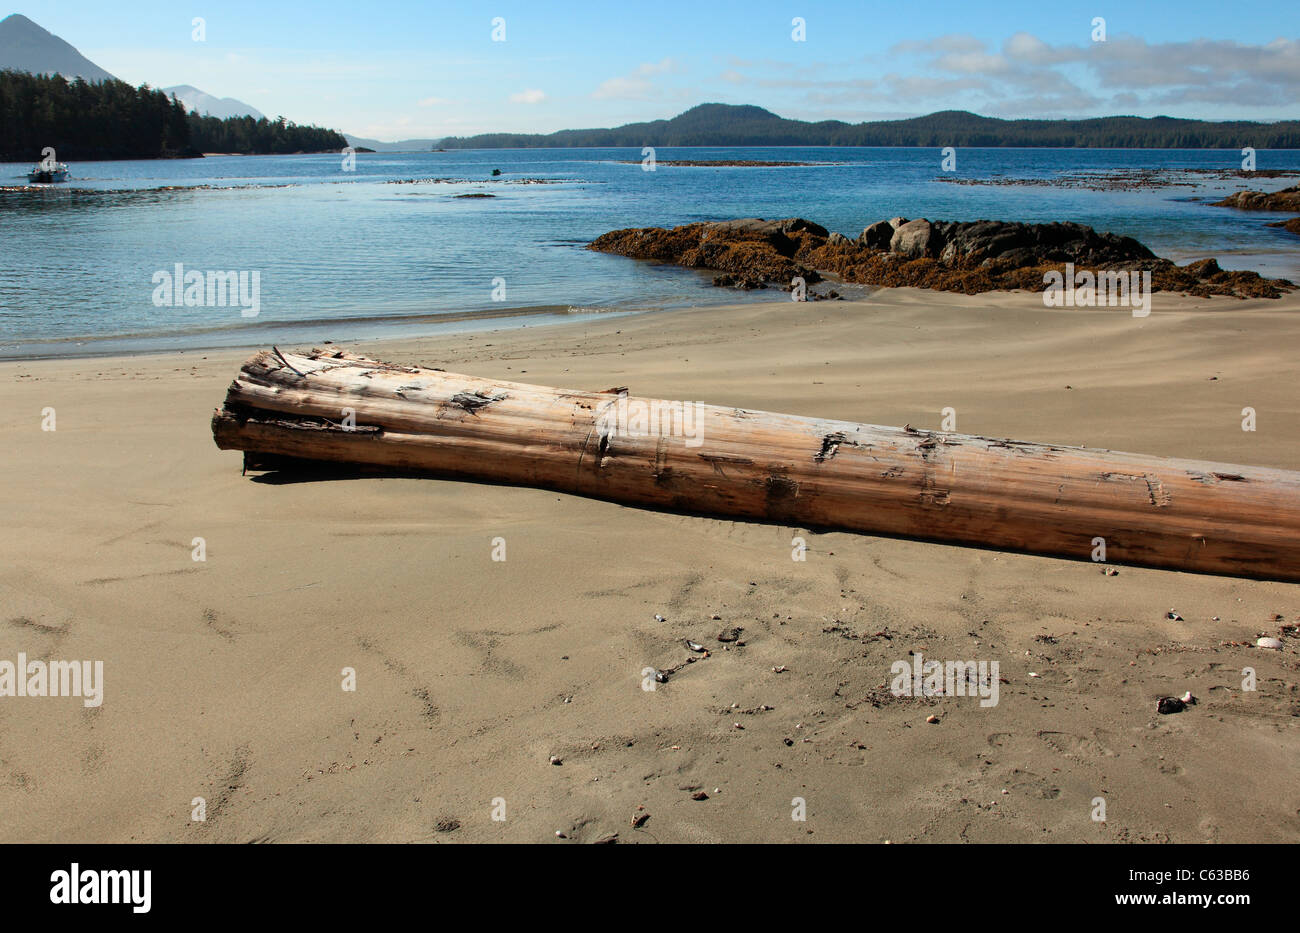 Big log washed up on a sandy beach on a calm summer morning Stock Photo